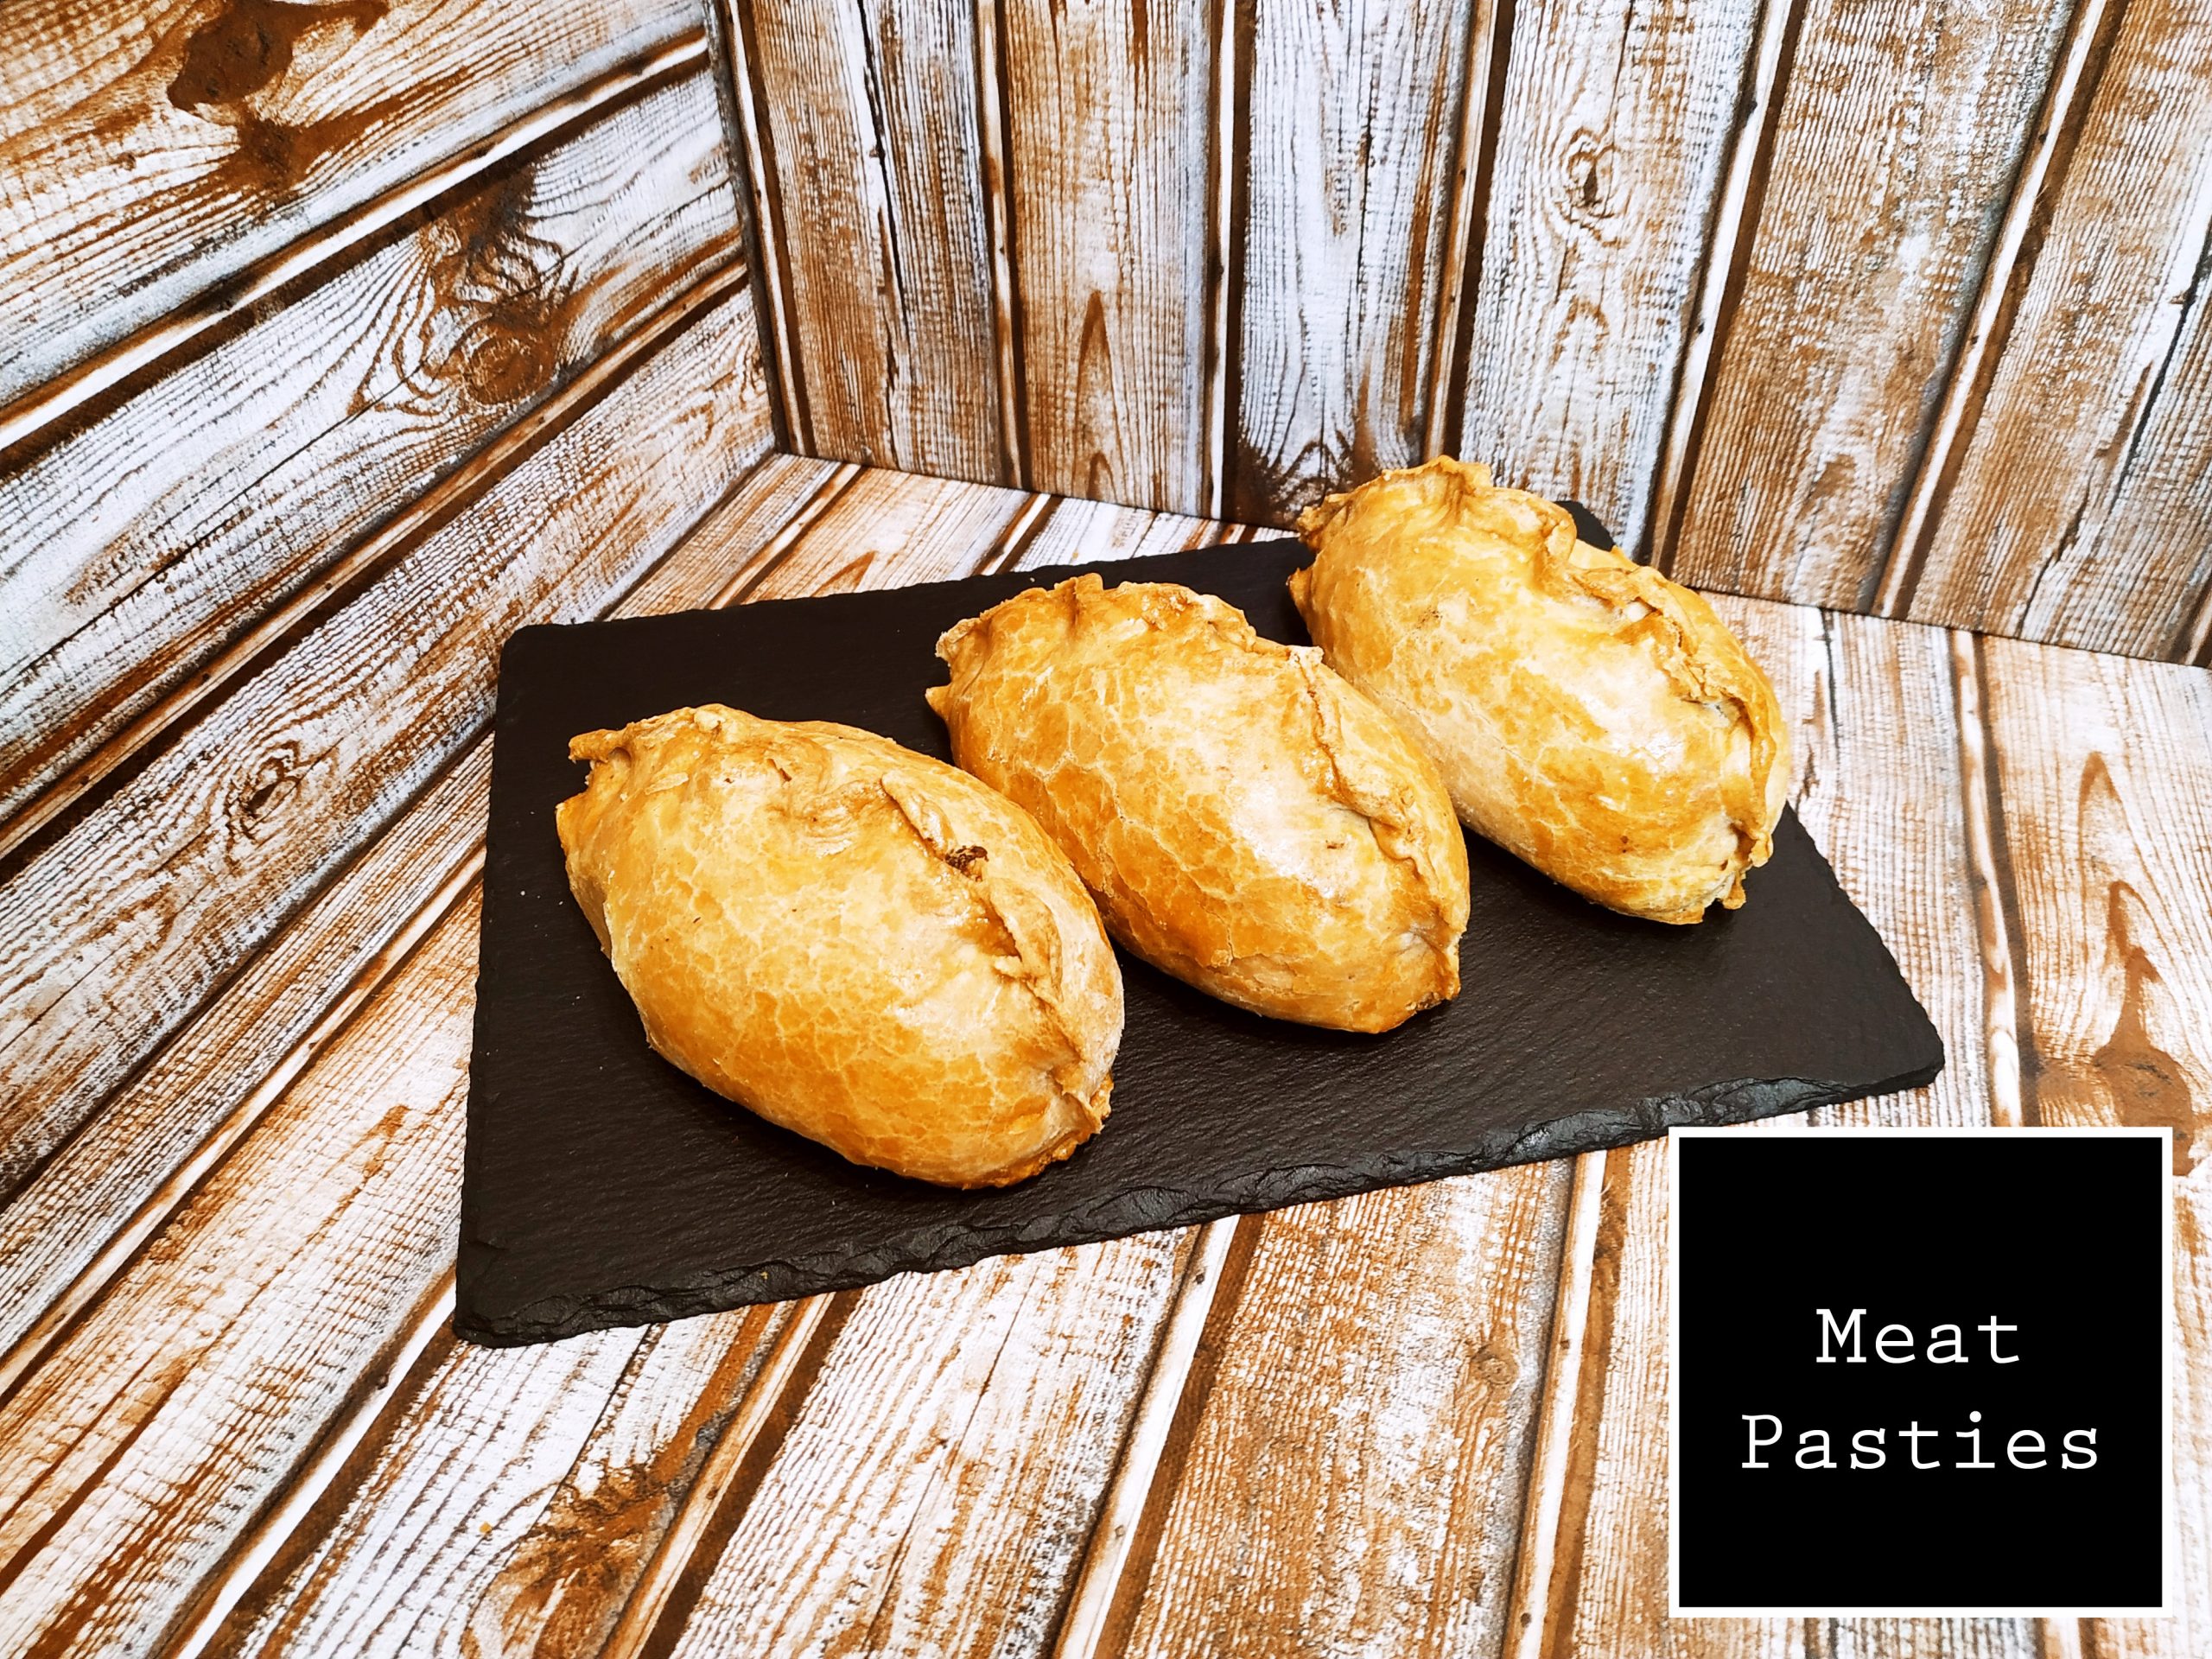 Meat Pasties by Sandwich in the Square